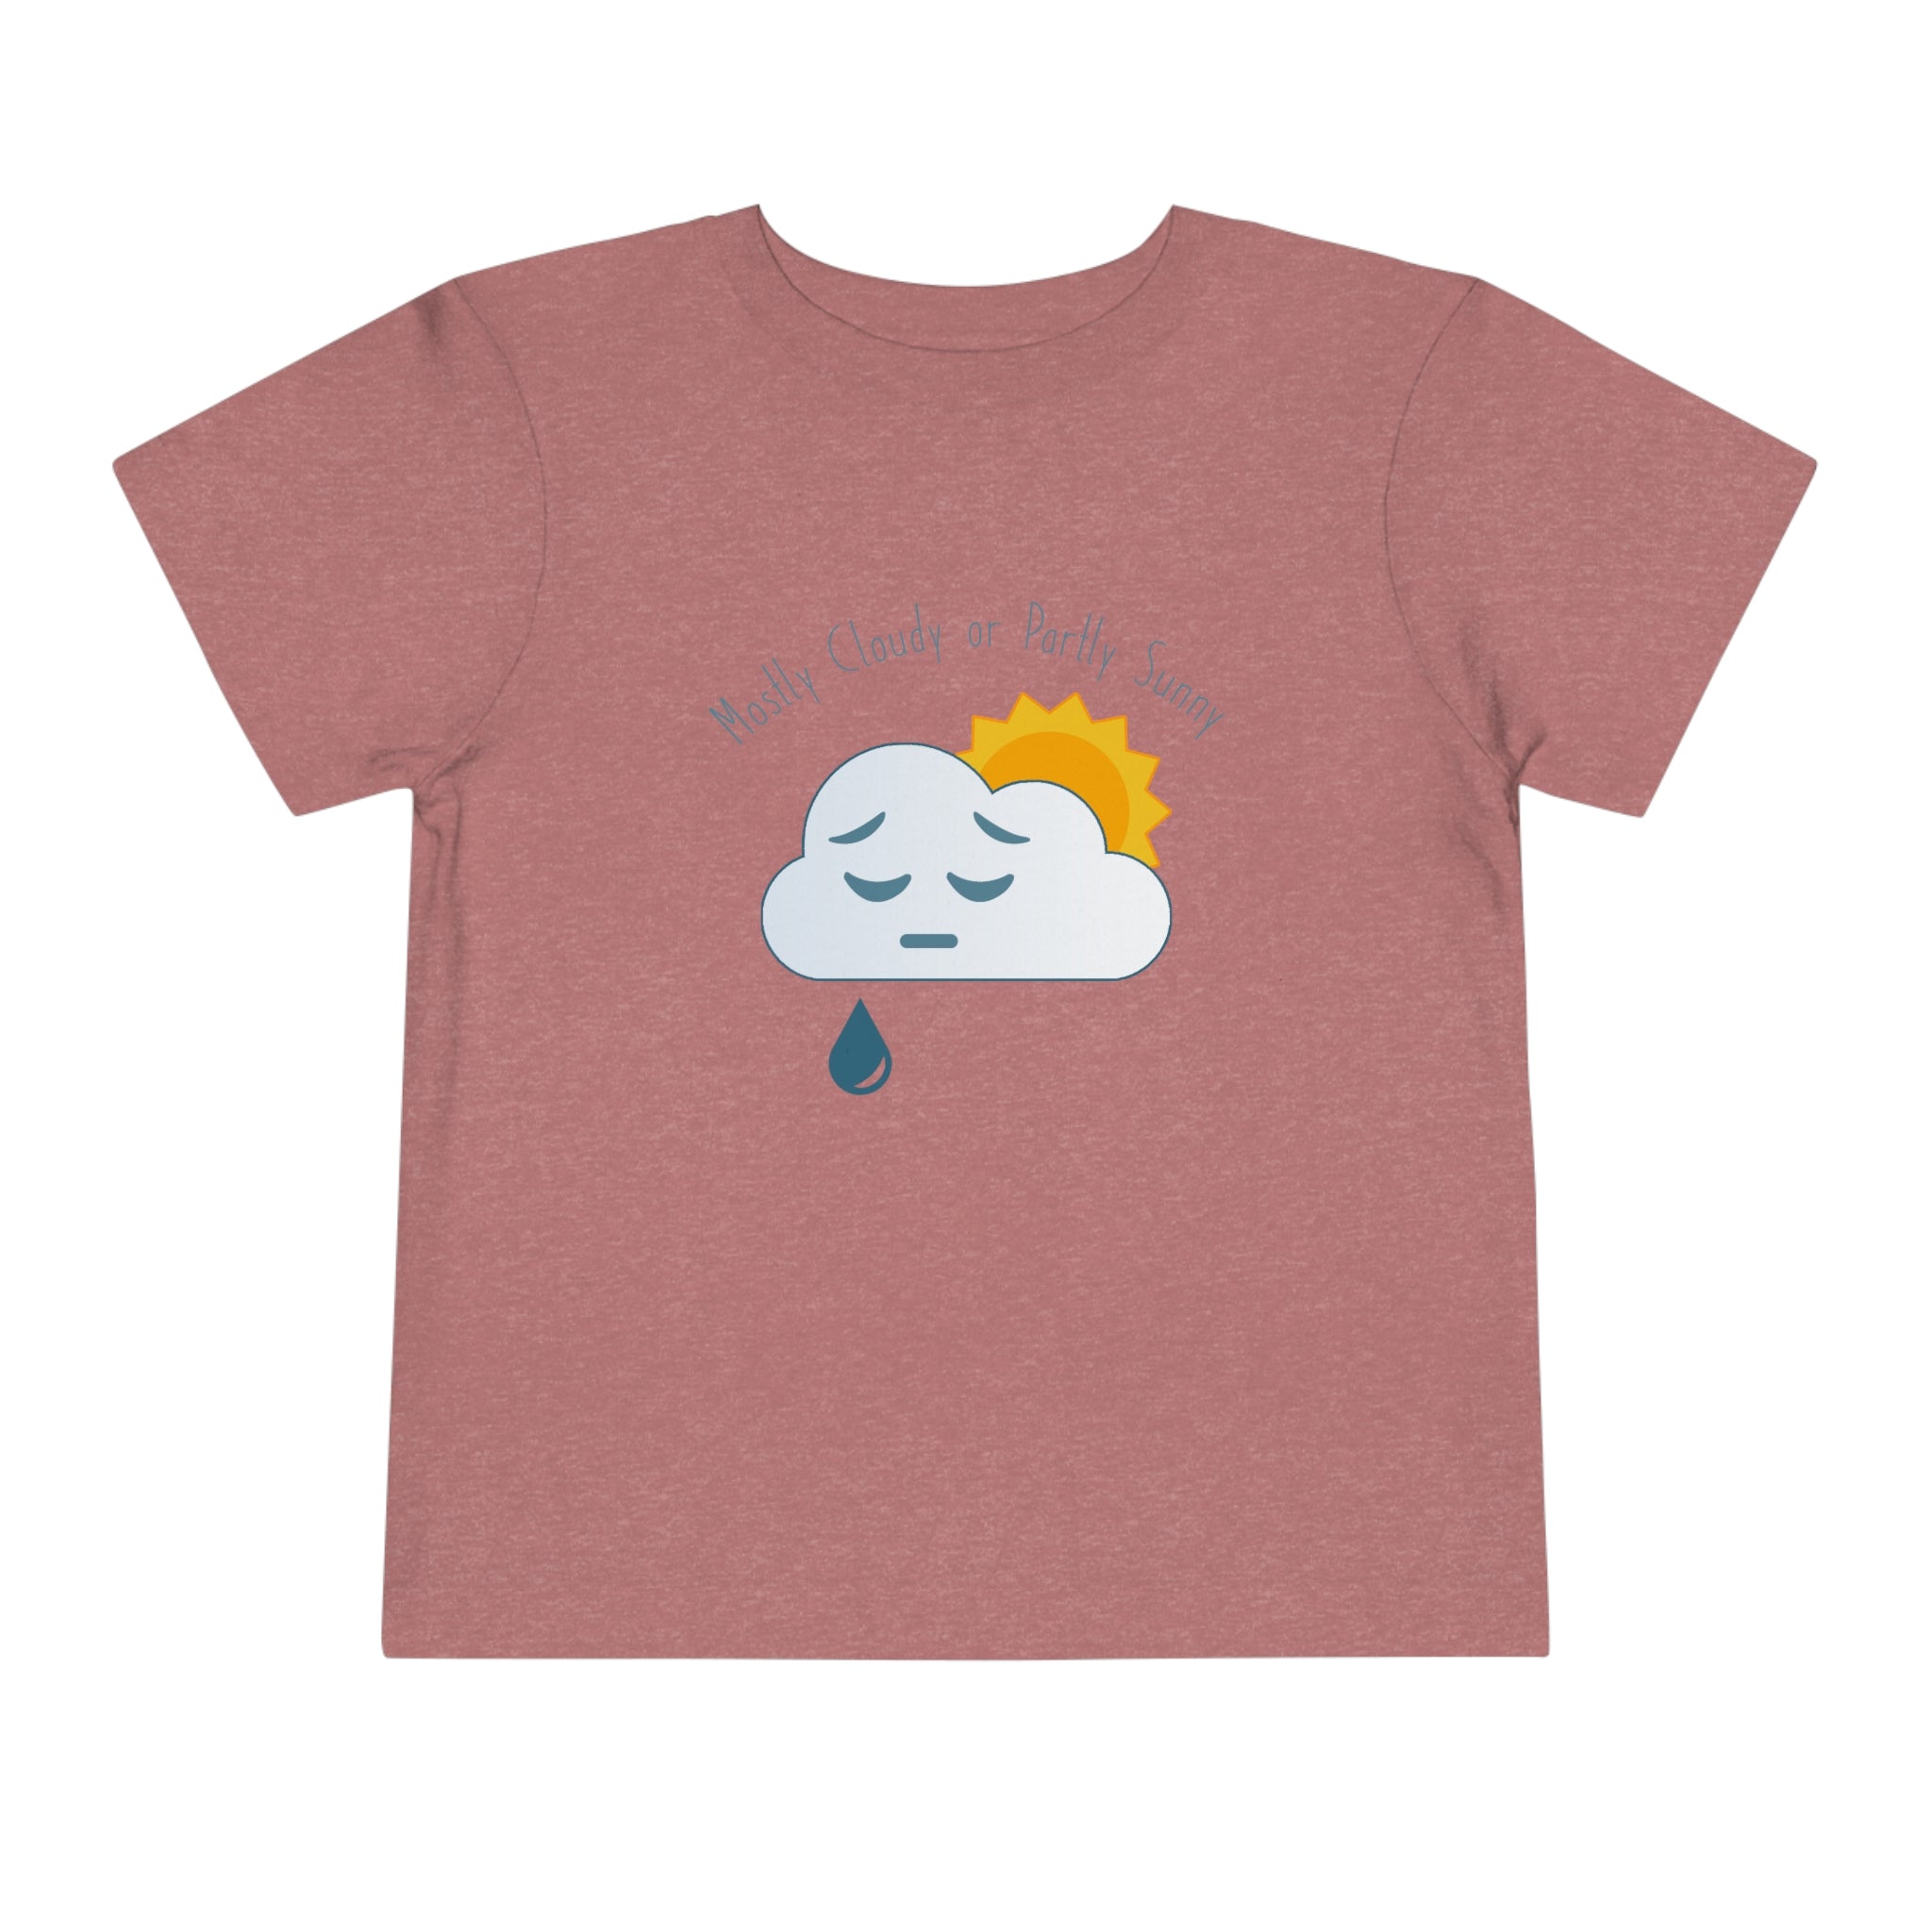 Mostly Cloudy Toddler Tee 